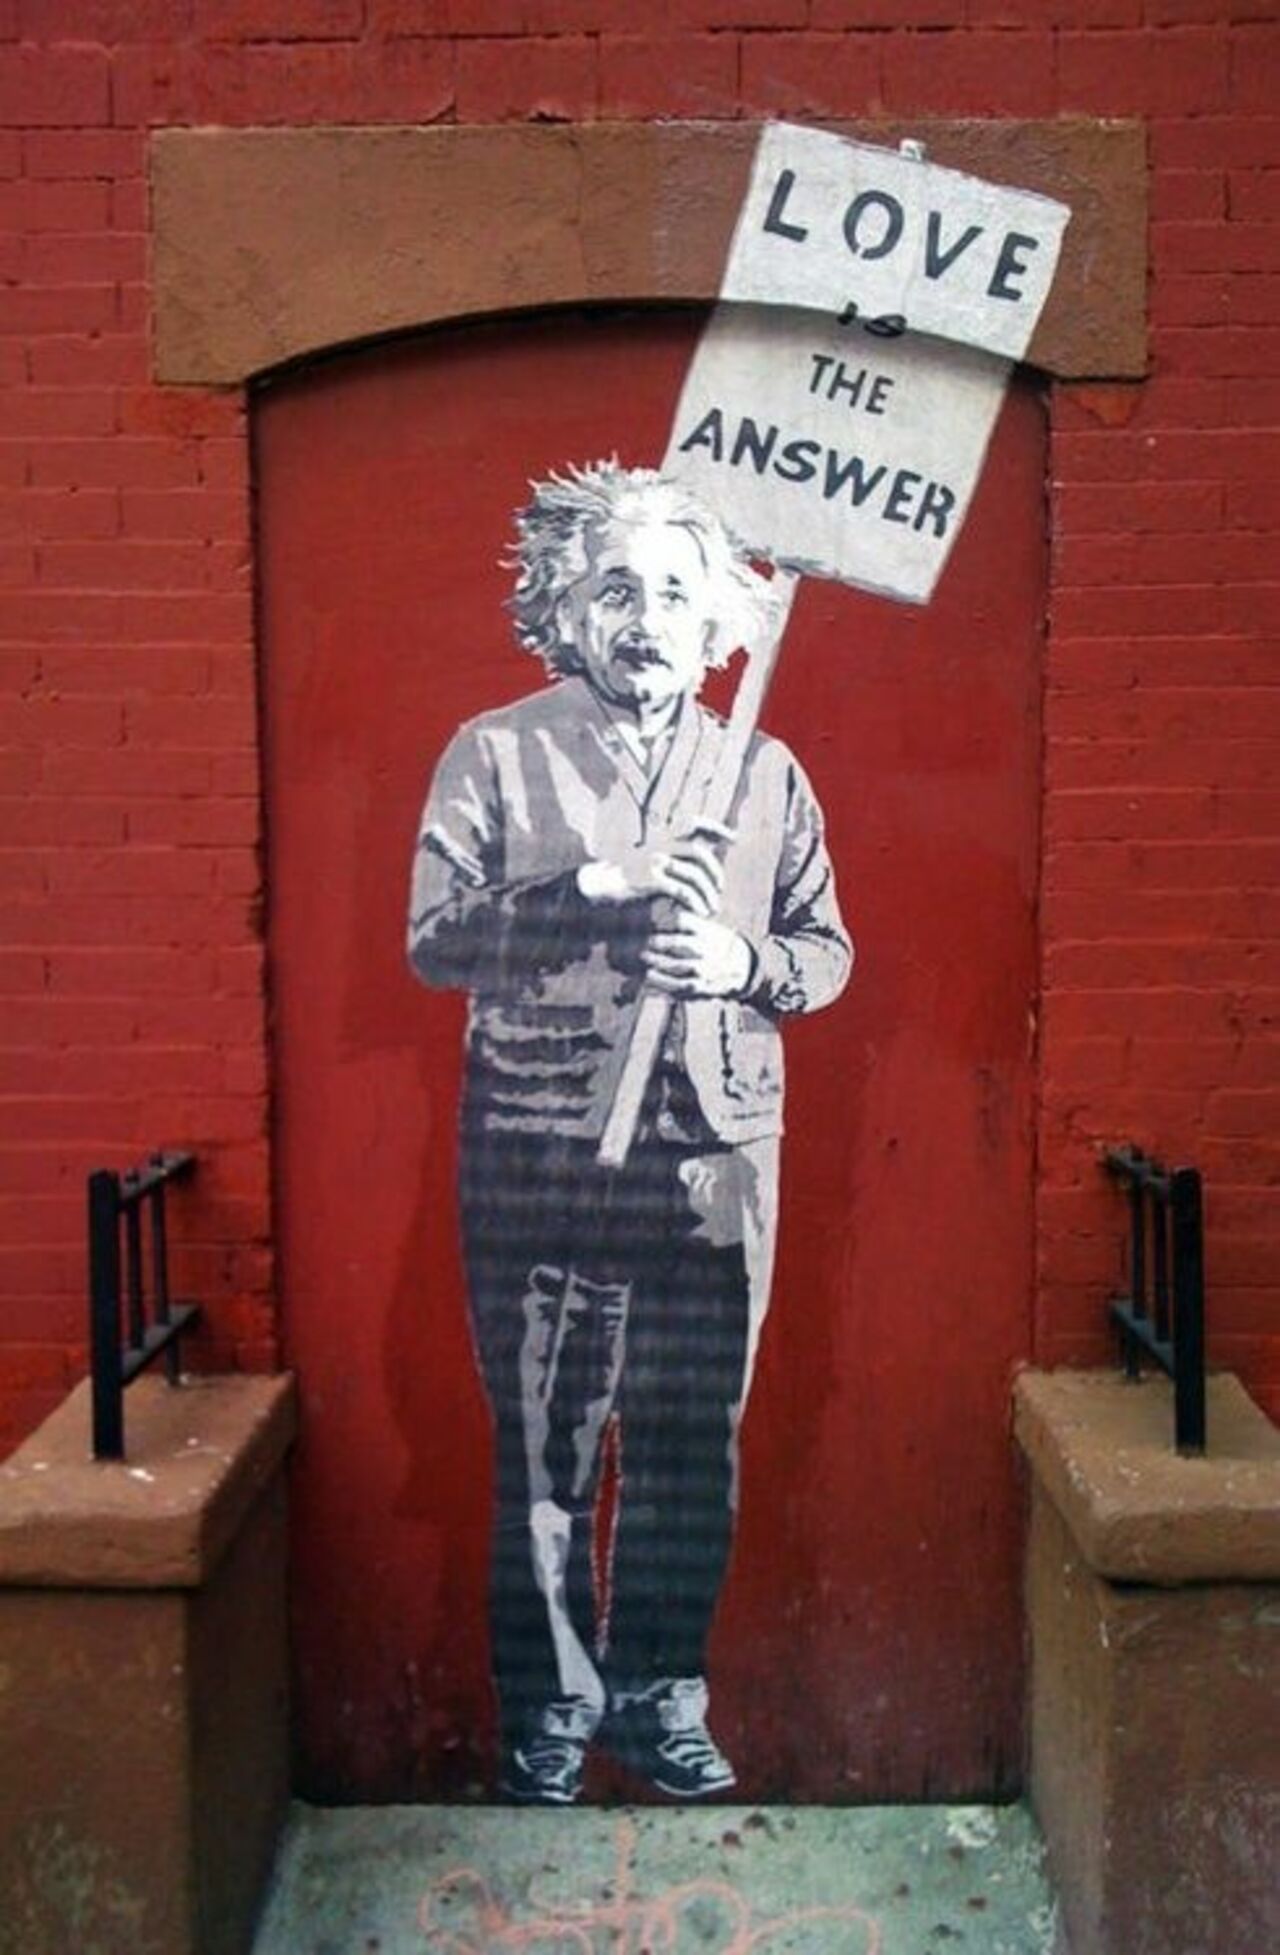 "@OsvaldovanN: 'Love is the Answer' by Banksy :: #Art :: #Graffiti http://t.co/5RfqS7Xroo" ☆ ☆ ☆